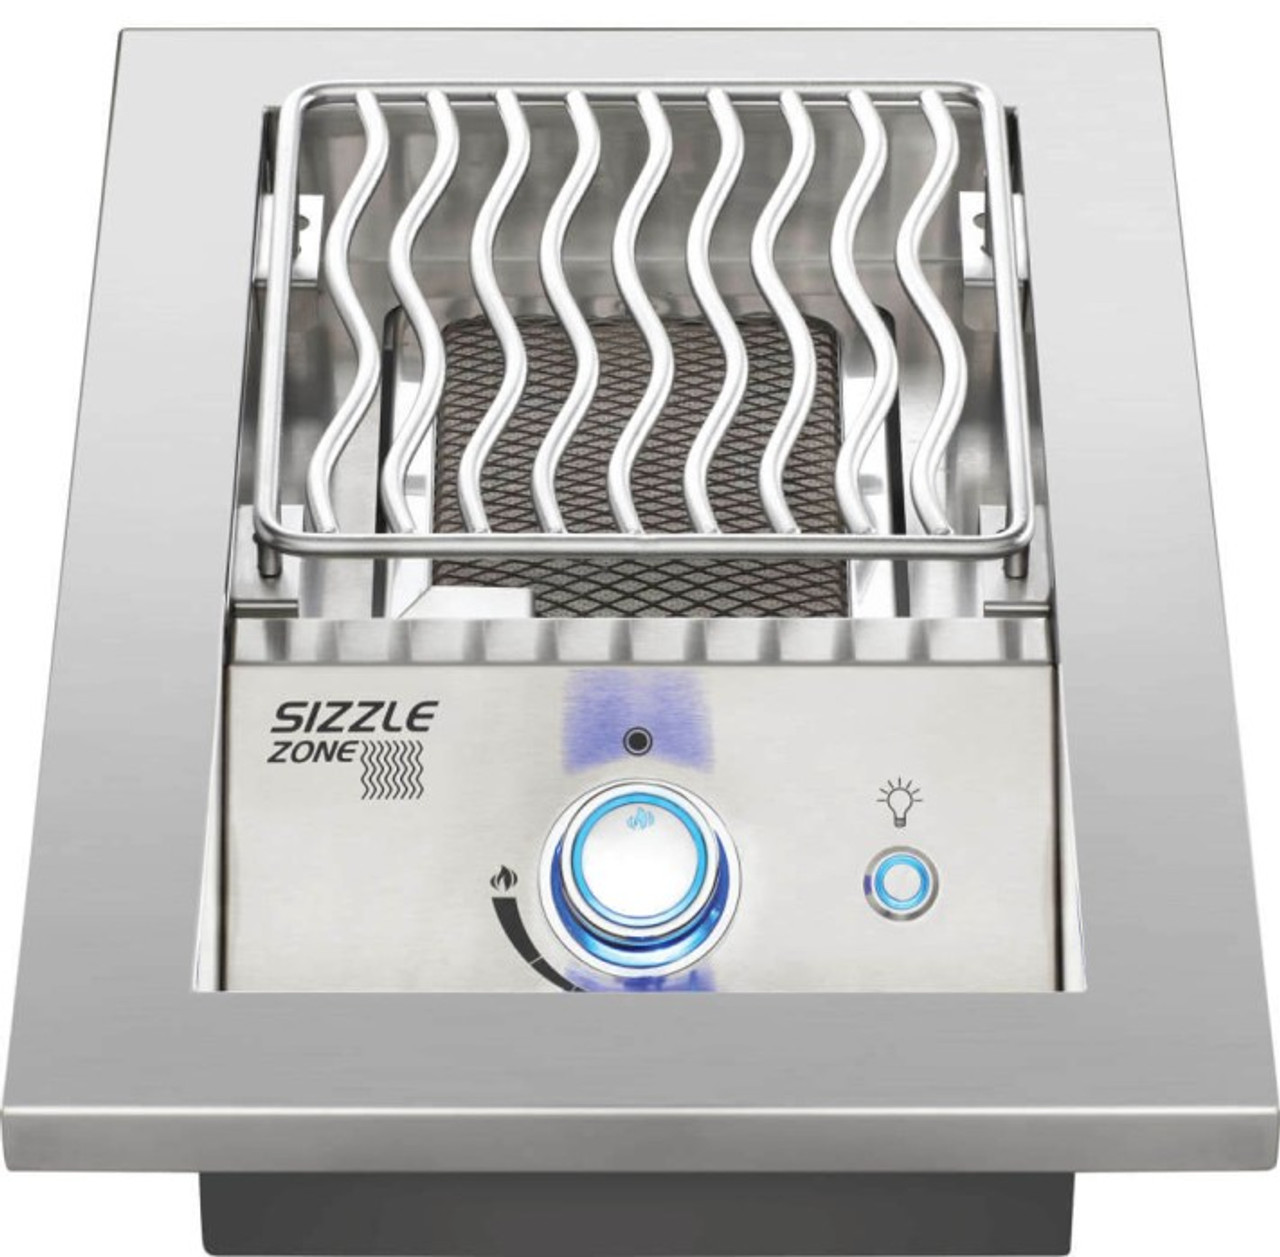 BIB10IRPSSAU - Built-In 700 Series Single Infrared Burner with Stainless Steel Cover - Stainless Steel